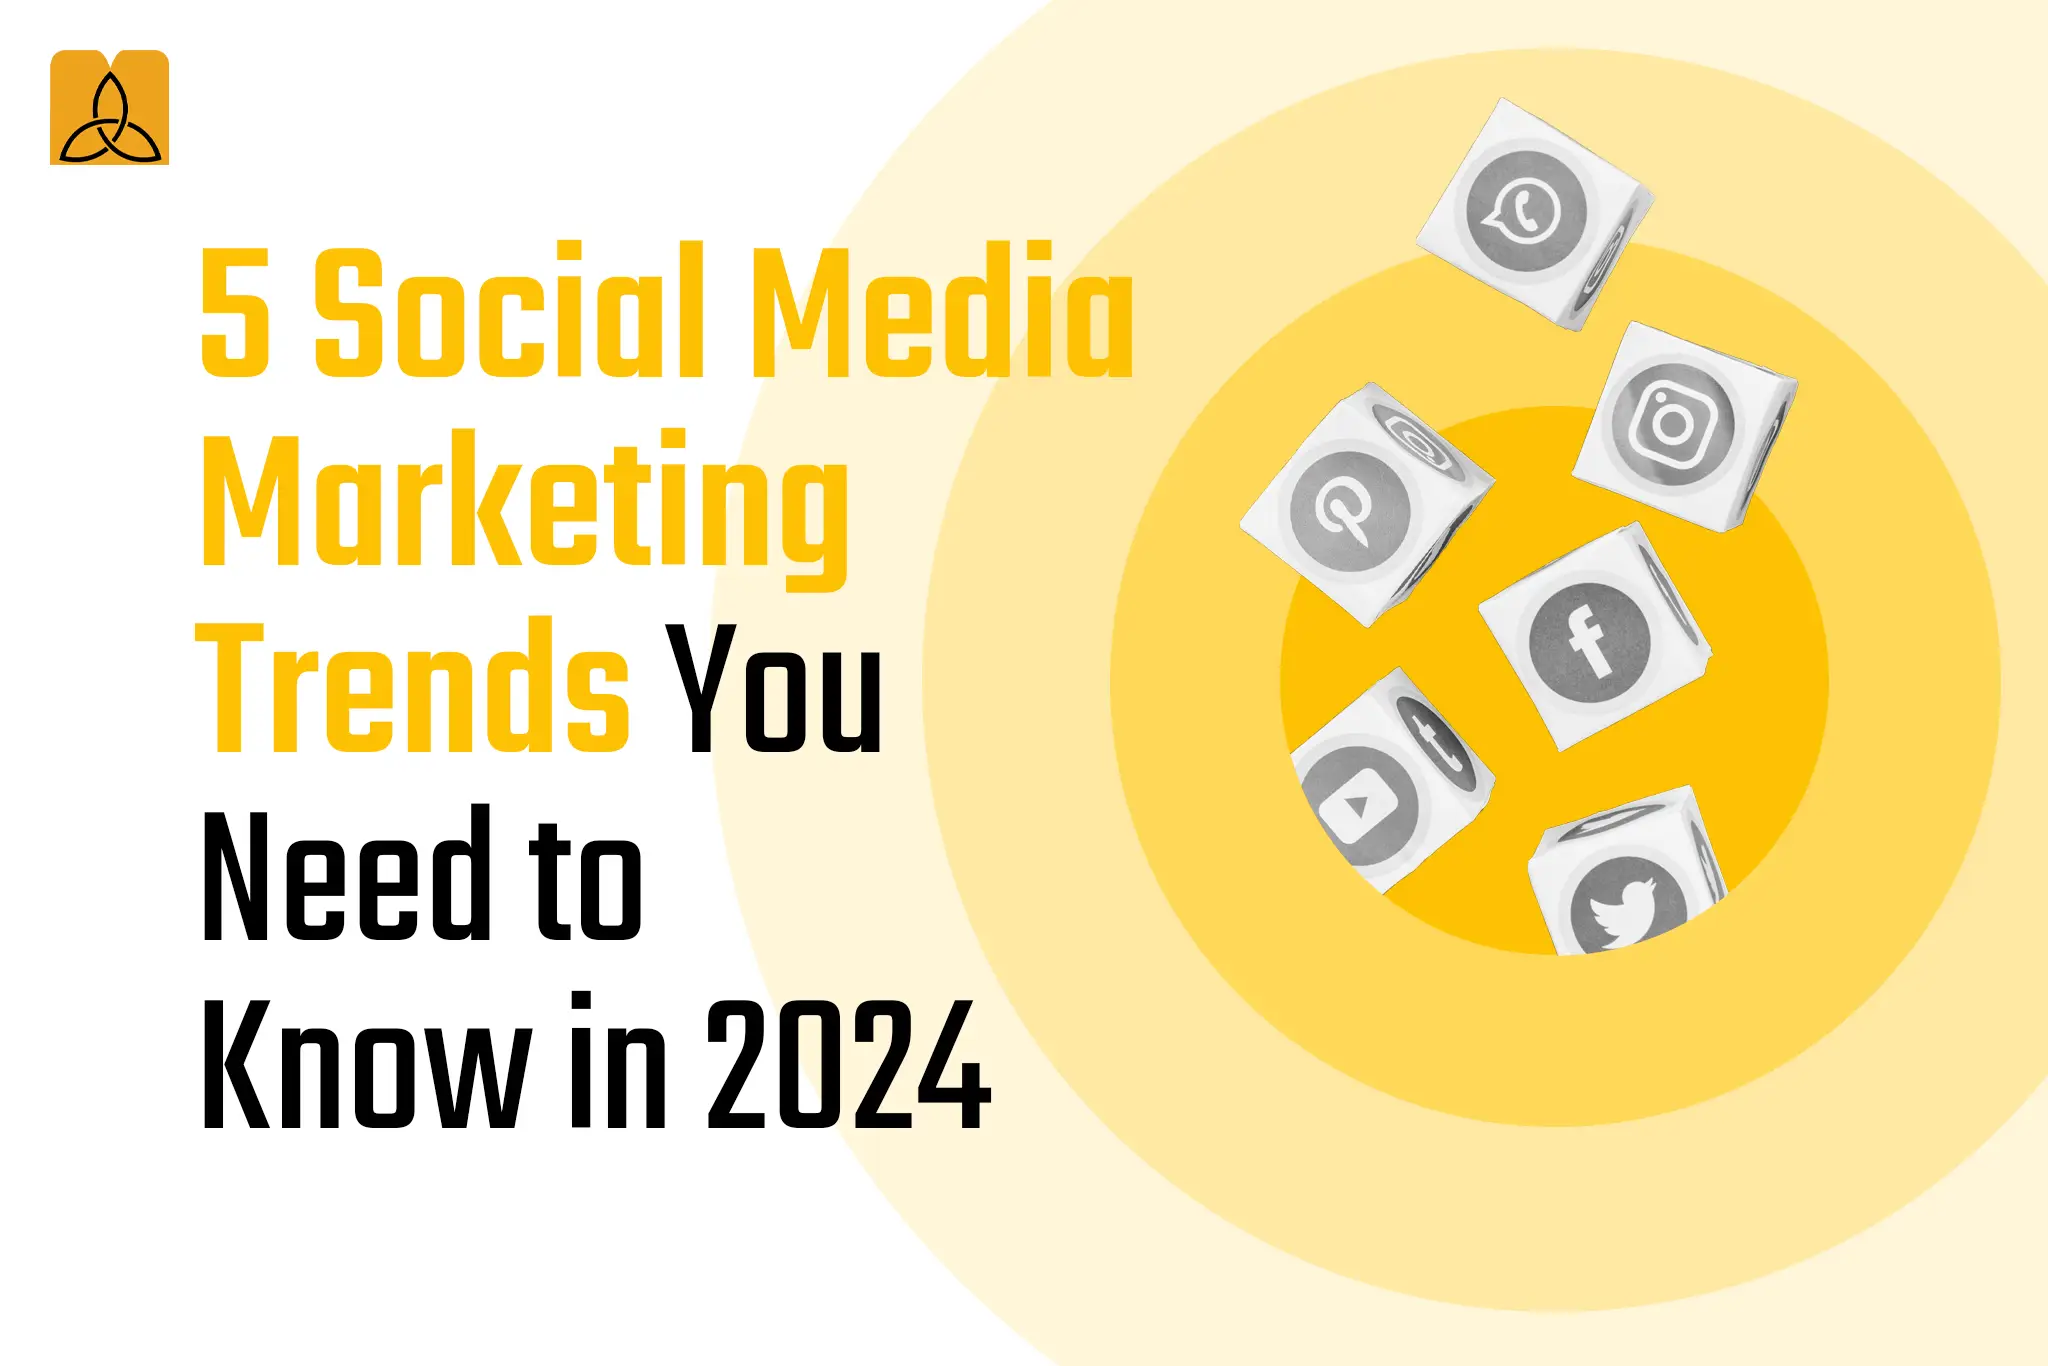 5 Social Media Marketing Trends You Need to Know in 2024